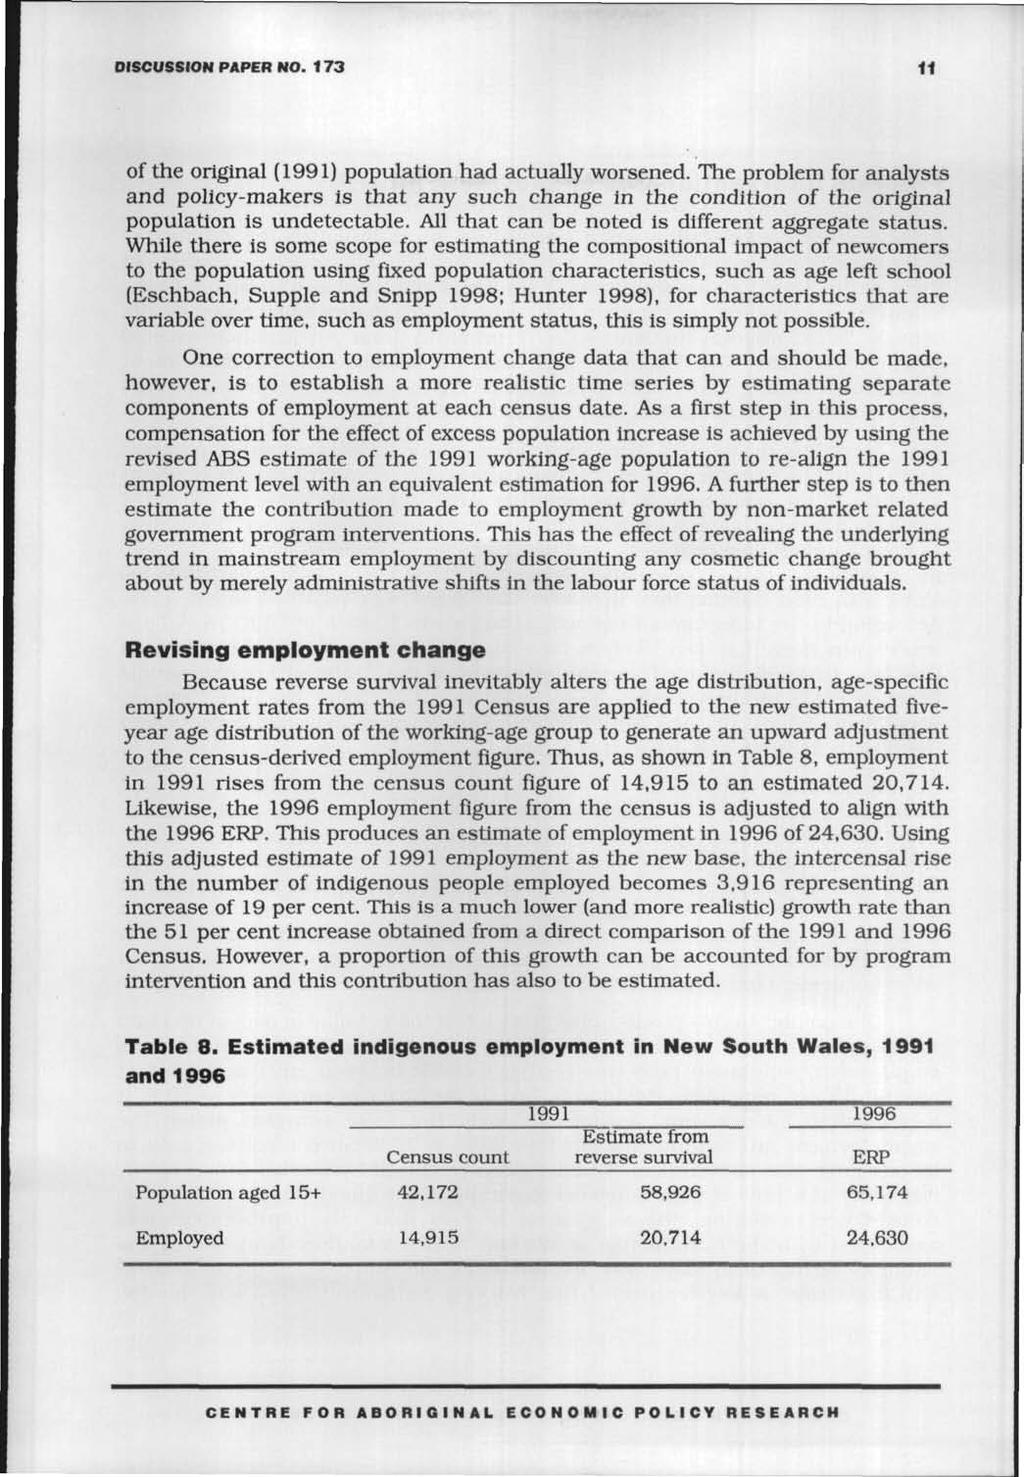 DISCUSSION PAPER NO. 173 11 of the original (1991) population had actually worsened.